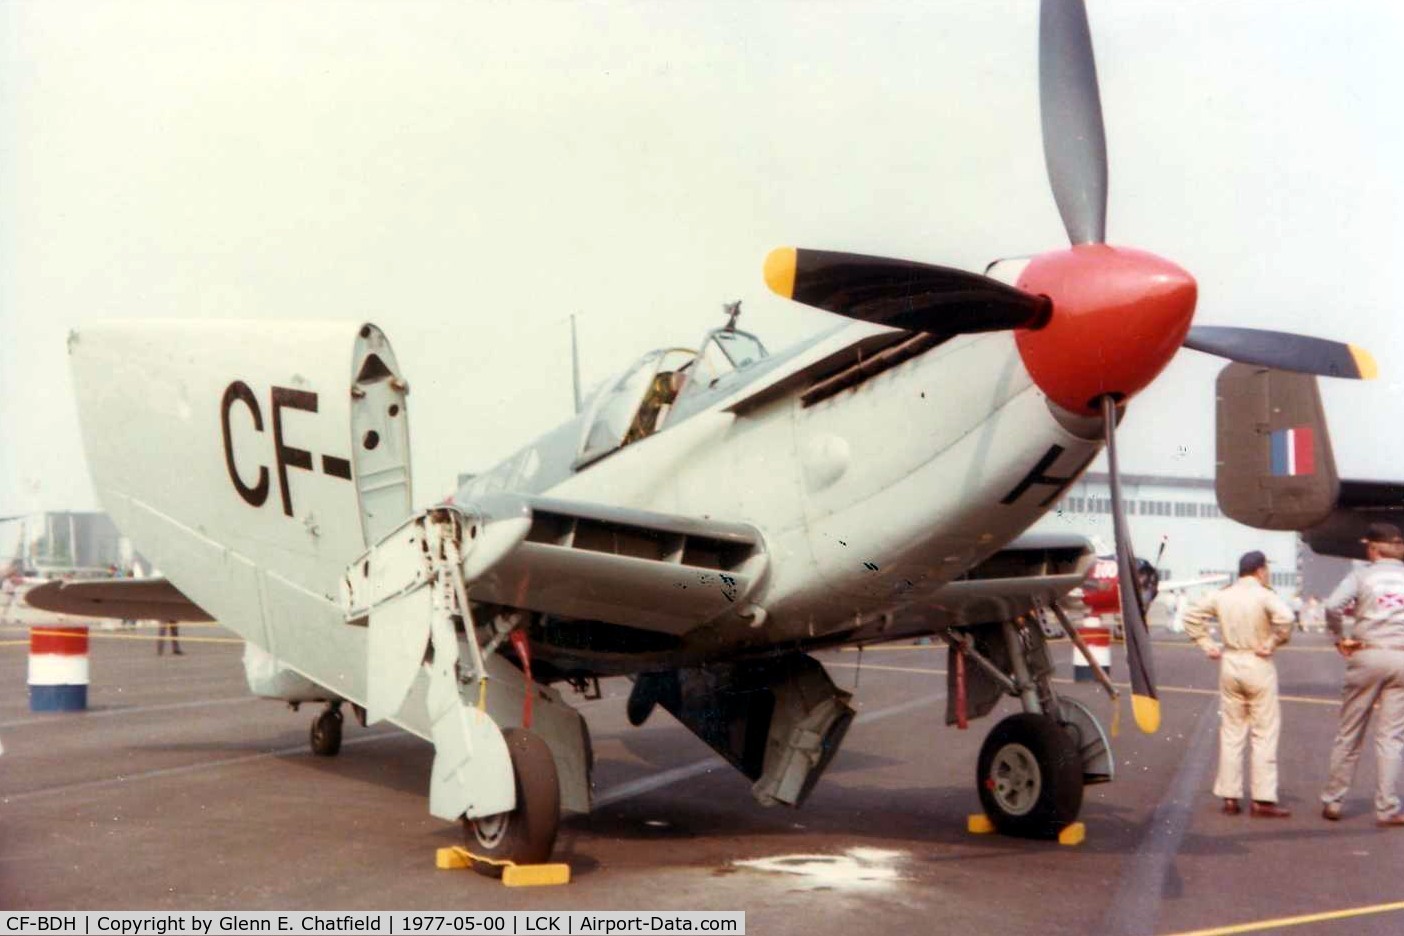 CF-BDH, Fairey Firefly TT.6 C/N F.8724, T.T. Mk.6 Firefly, serial WD901, at the Mother's Day open house.  This plane crashed into Lake Ontario 9/2/77